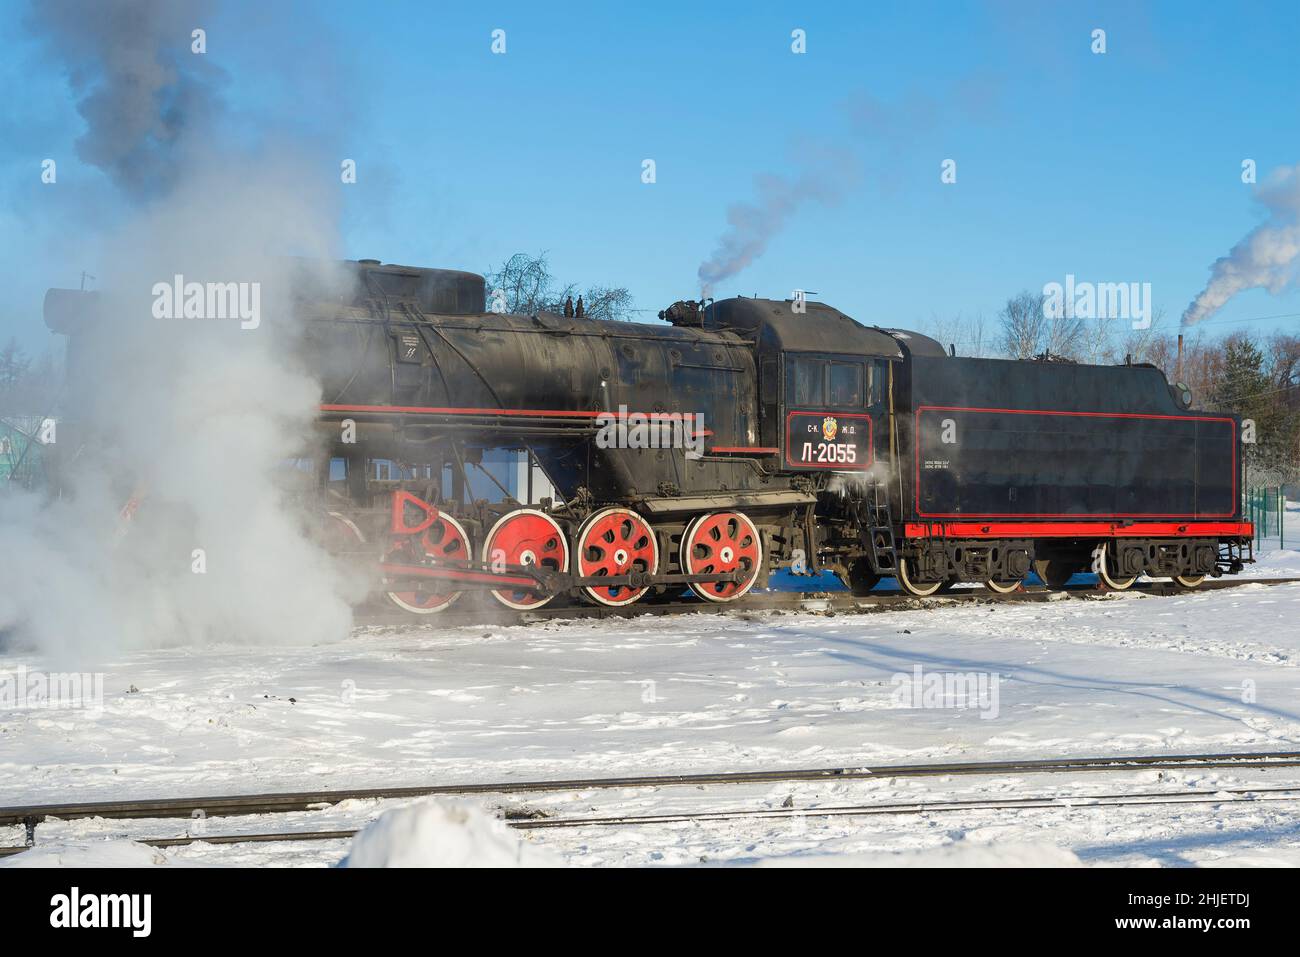 SORTAVALA, RUSSIA - MARCH 10, 2021: Old Soviet freight steam locomotive L-2055 on station access roads on a sunny winter day Stock Photo